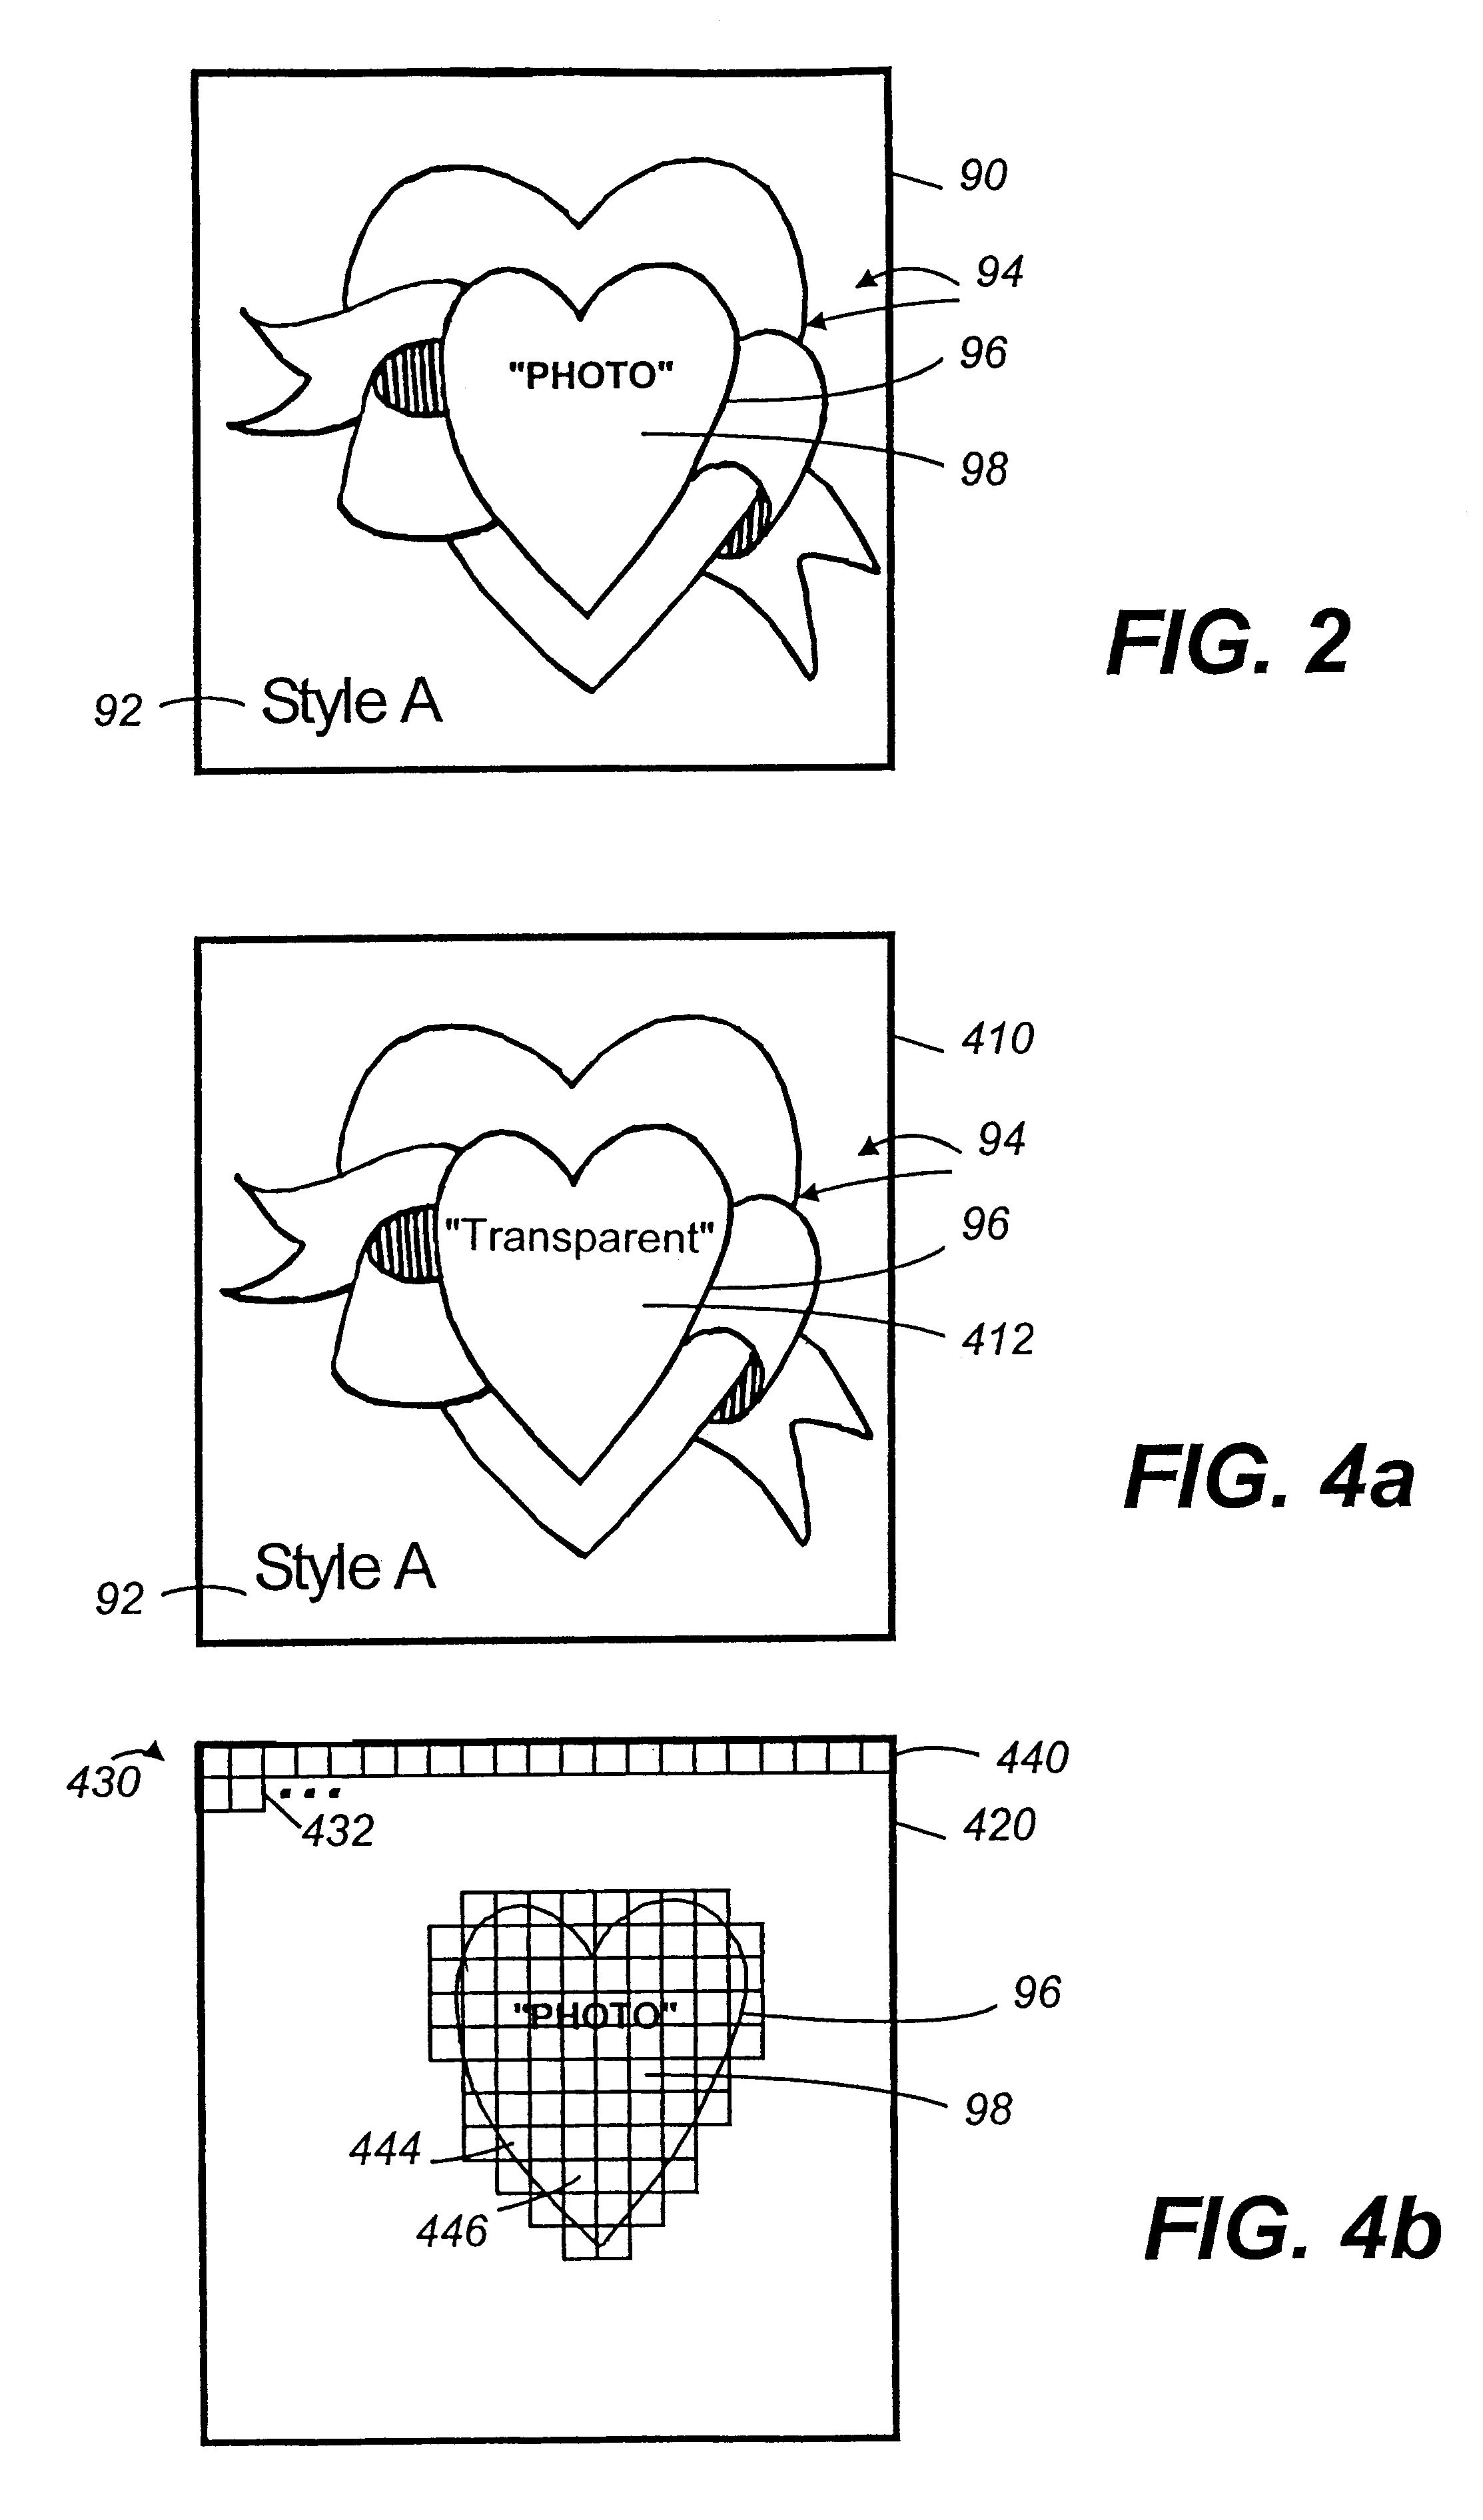 Apparatus and method for hybrid compression and decompression of raster data